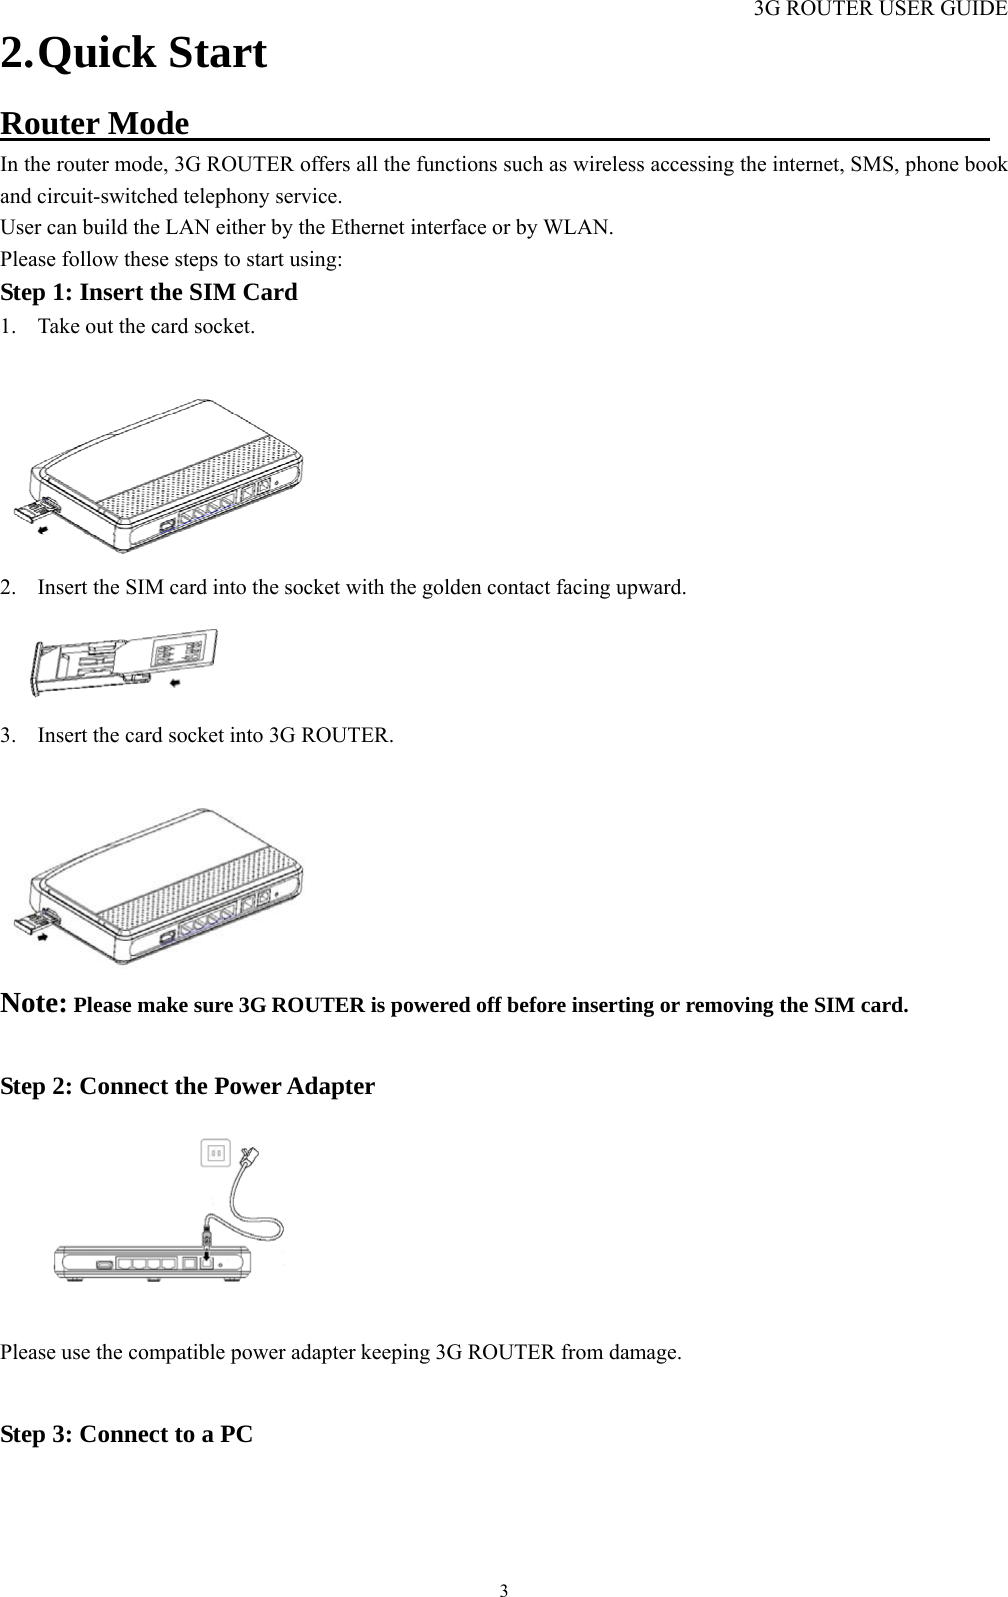 3G ROUTER USER GUIDE  32. Quick Start Router Mode                                                 In the router mode, 3G ROUTER offers all the functions such as wireless accessing the internet, SMS, phone book and circuit-switched telephony service. User can build the LAN either by the Ethernet interface or by WLAN. Please follow these steps to start using: Step 1: Insert the SIM Card                                                           1. Take out the card socket.  2. Insert the SIM card into the socket with the golden contact facing upward.  3. Insert the card socket into 3G ROUTER.  Note: Please make sure 3G ROUTER is powered off before inserting or removing the SIM card.  Step 2: Connect the Power Adapter                                                             Please use the compatible power adapter keeping 3G ROUTER from damage.  Step 3: Connect to a PC                                                                         